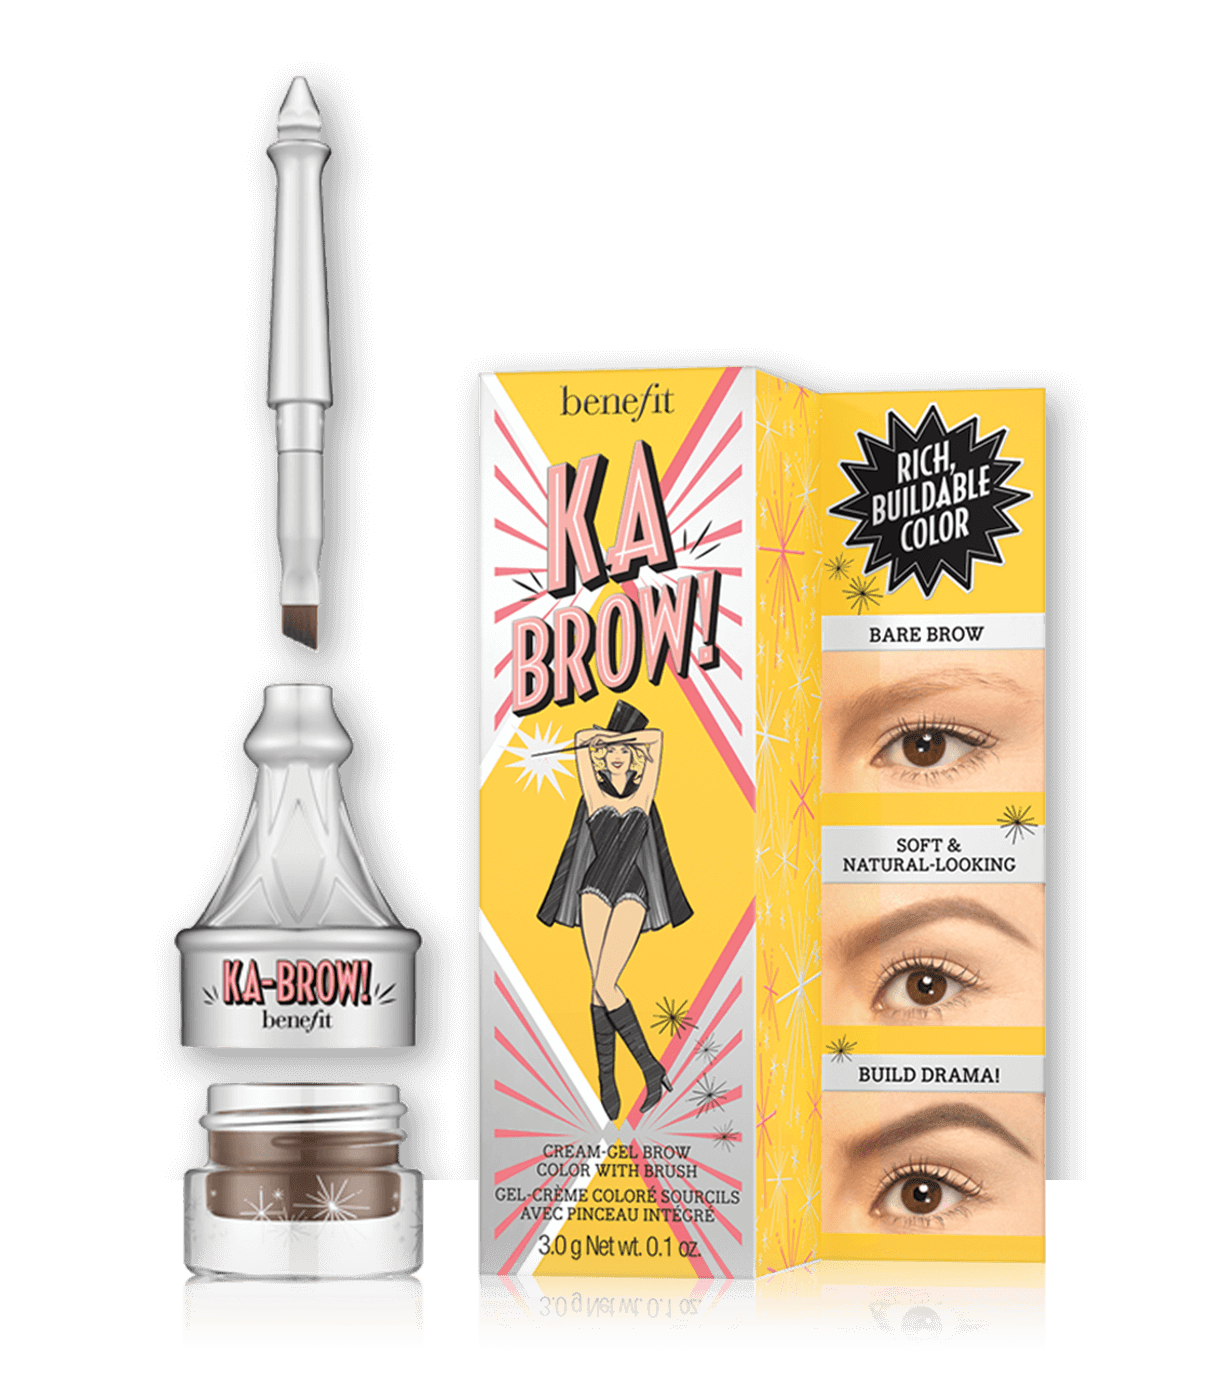 brow products kabrow benefit